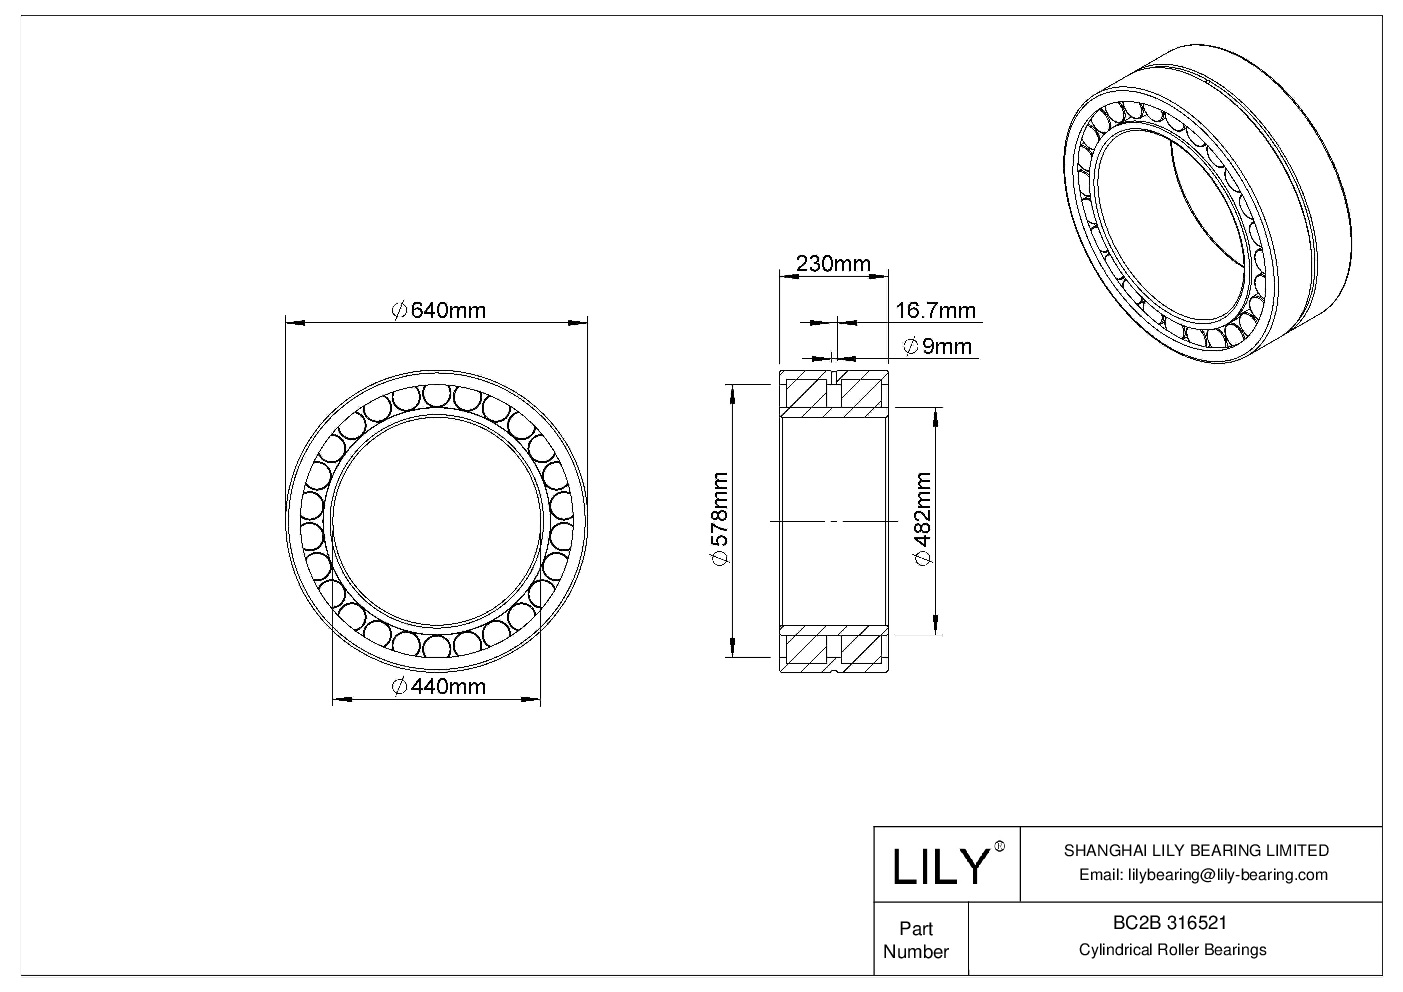 BC2B 316521 Double Row Cylindrical Roller Bearings cad drawing